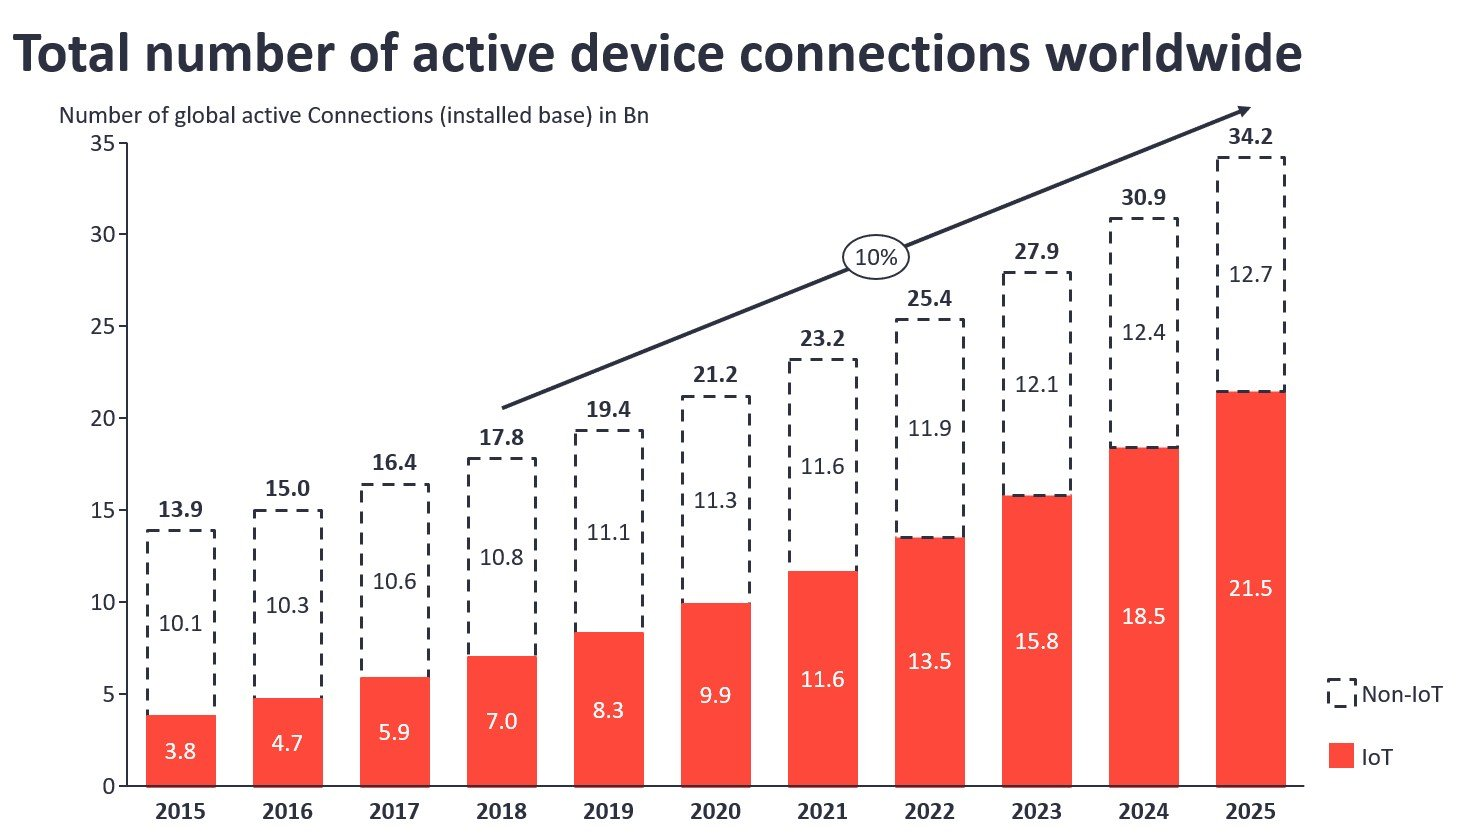 The growth in connected devices over the 2015-2025 decade. Source: IoT Analytics